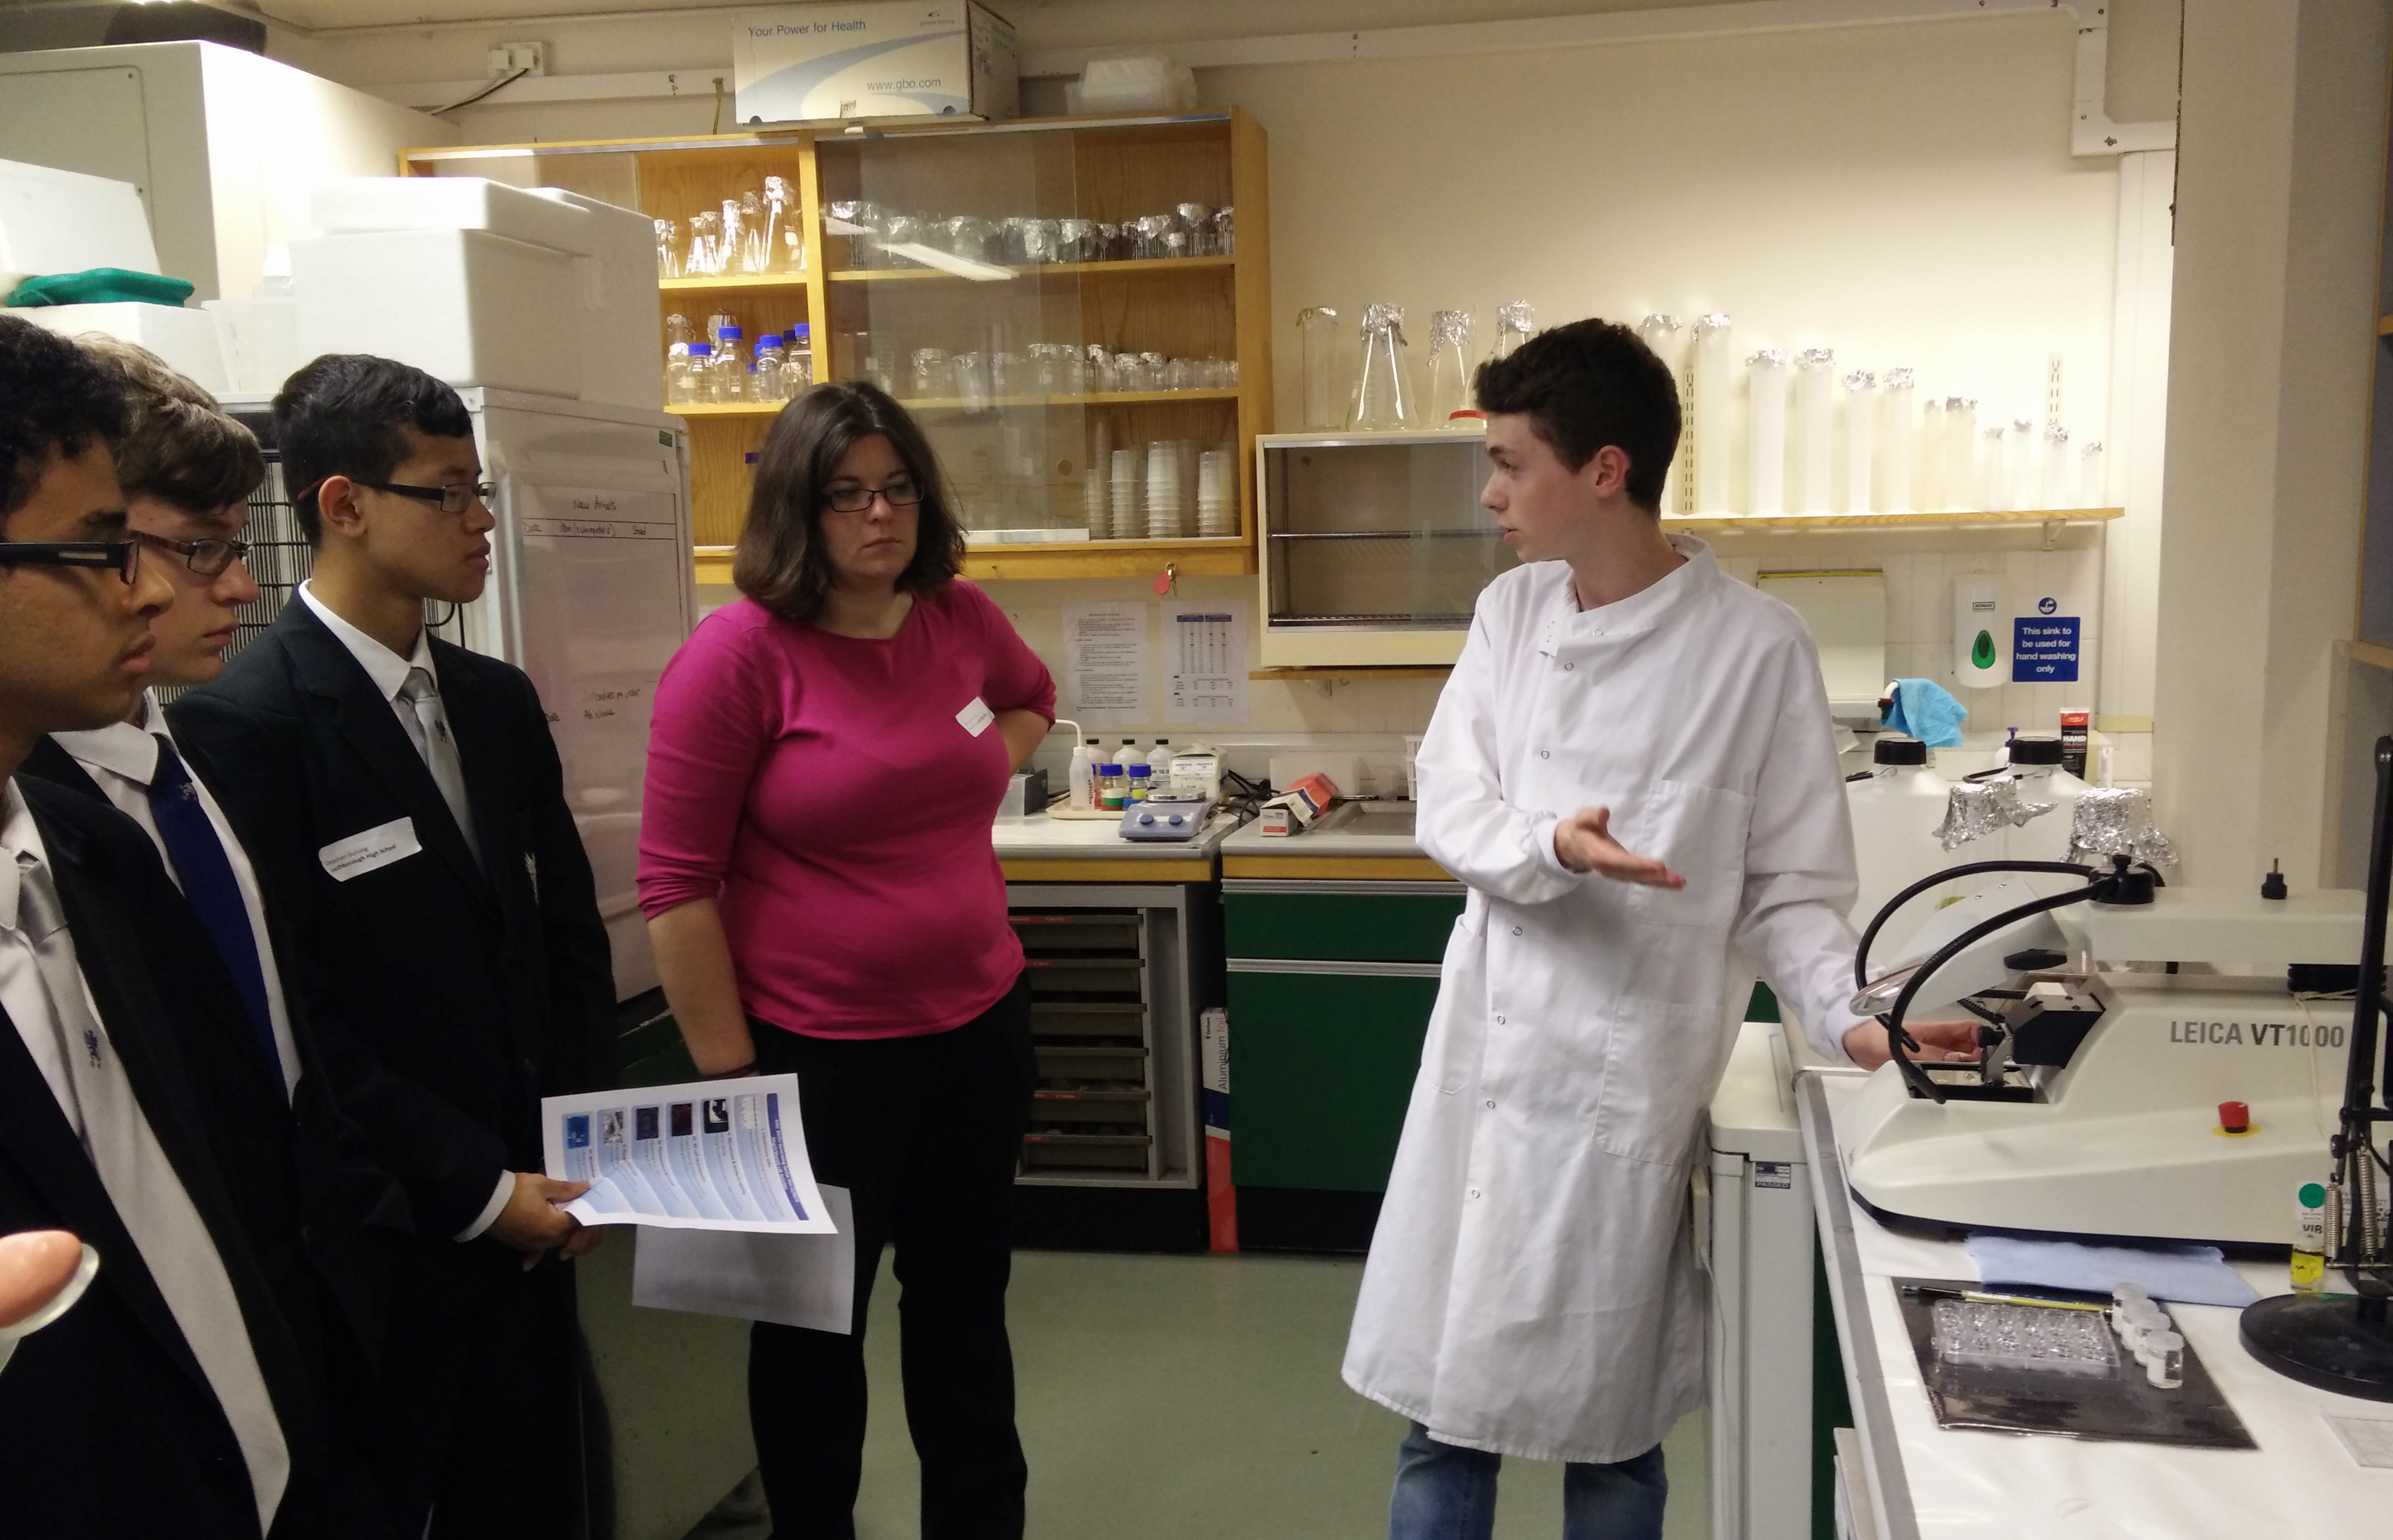 Unit FHS undergraduate student Calum McIntyre shows visiting pupils some of his research on brain structure.